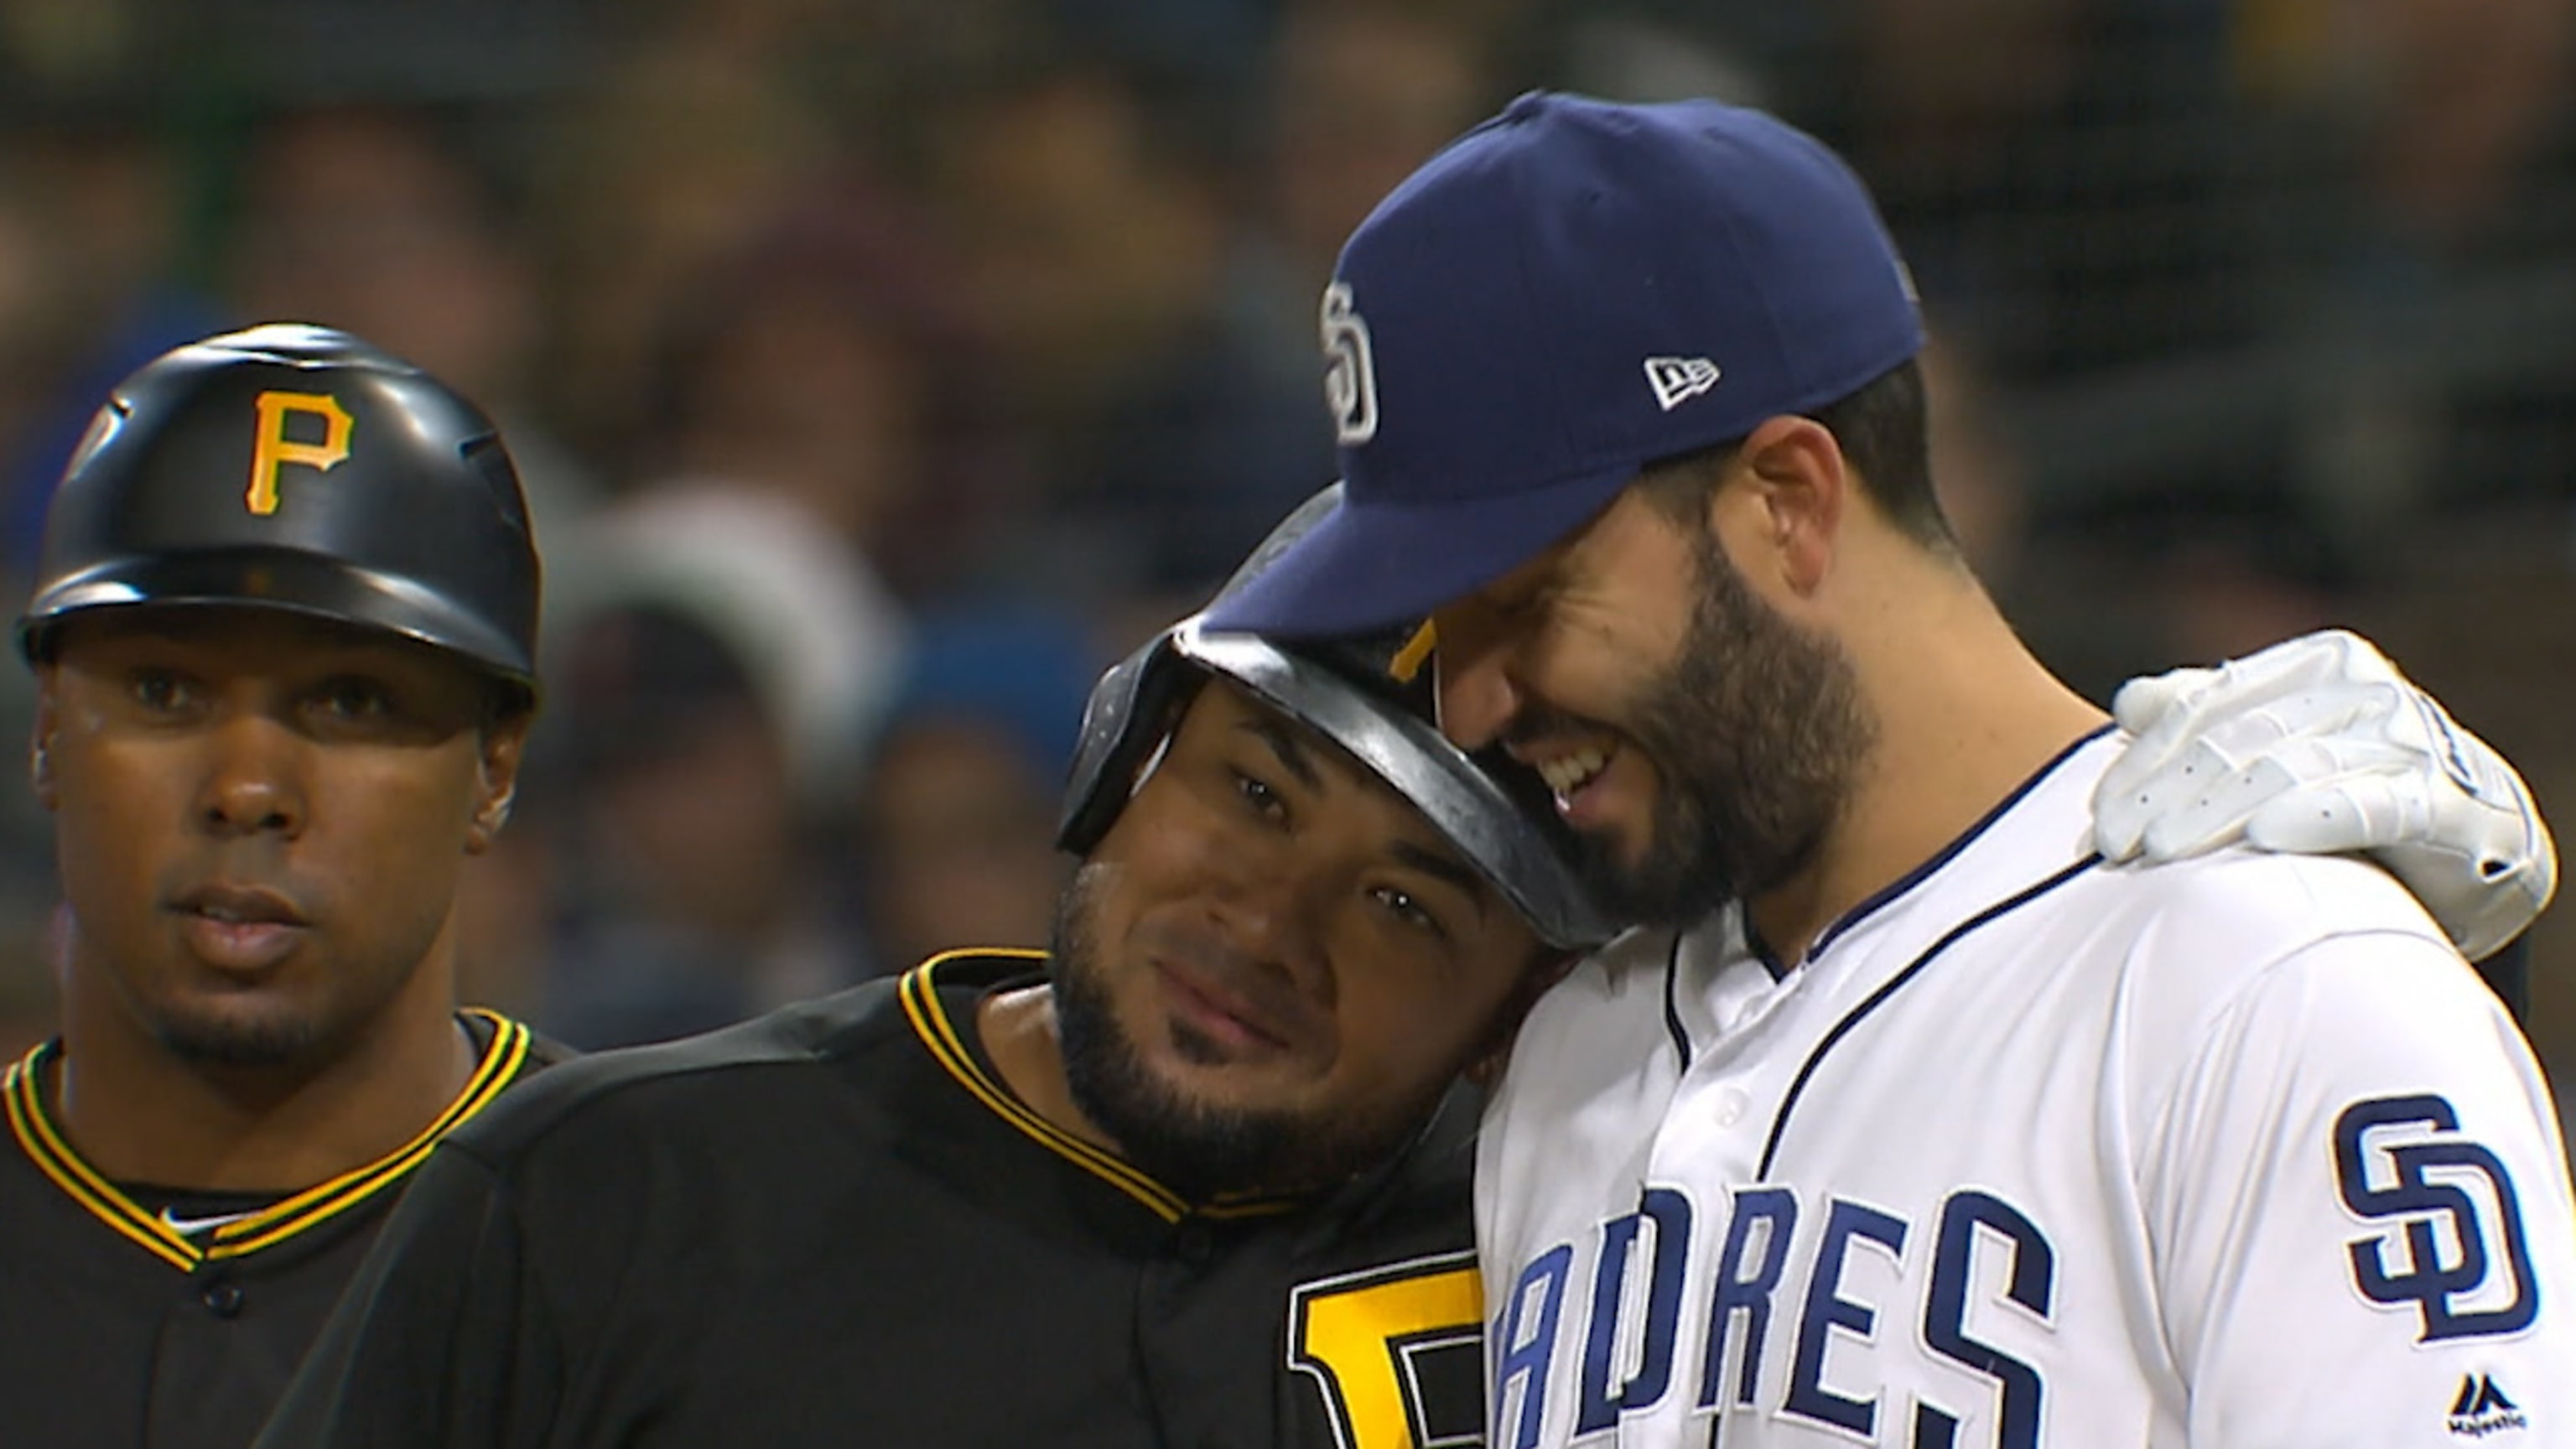 Cabrera and Hosmer are old friends